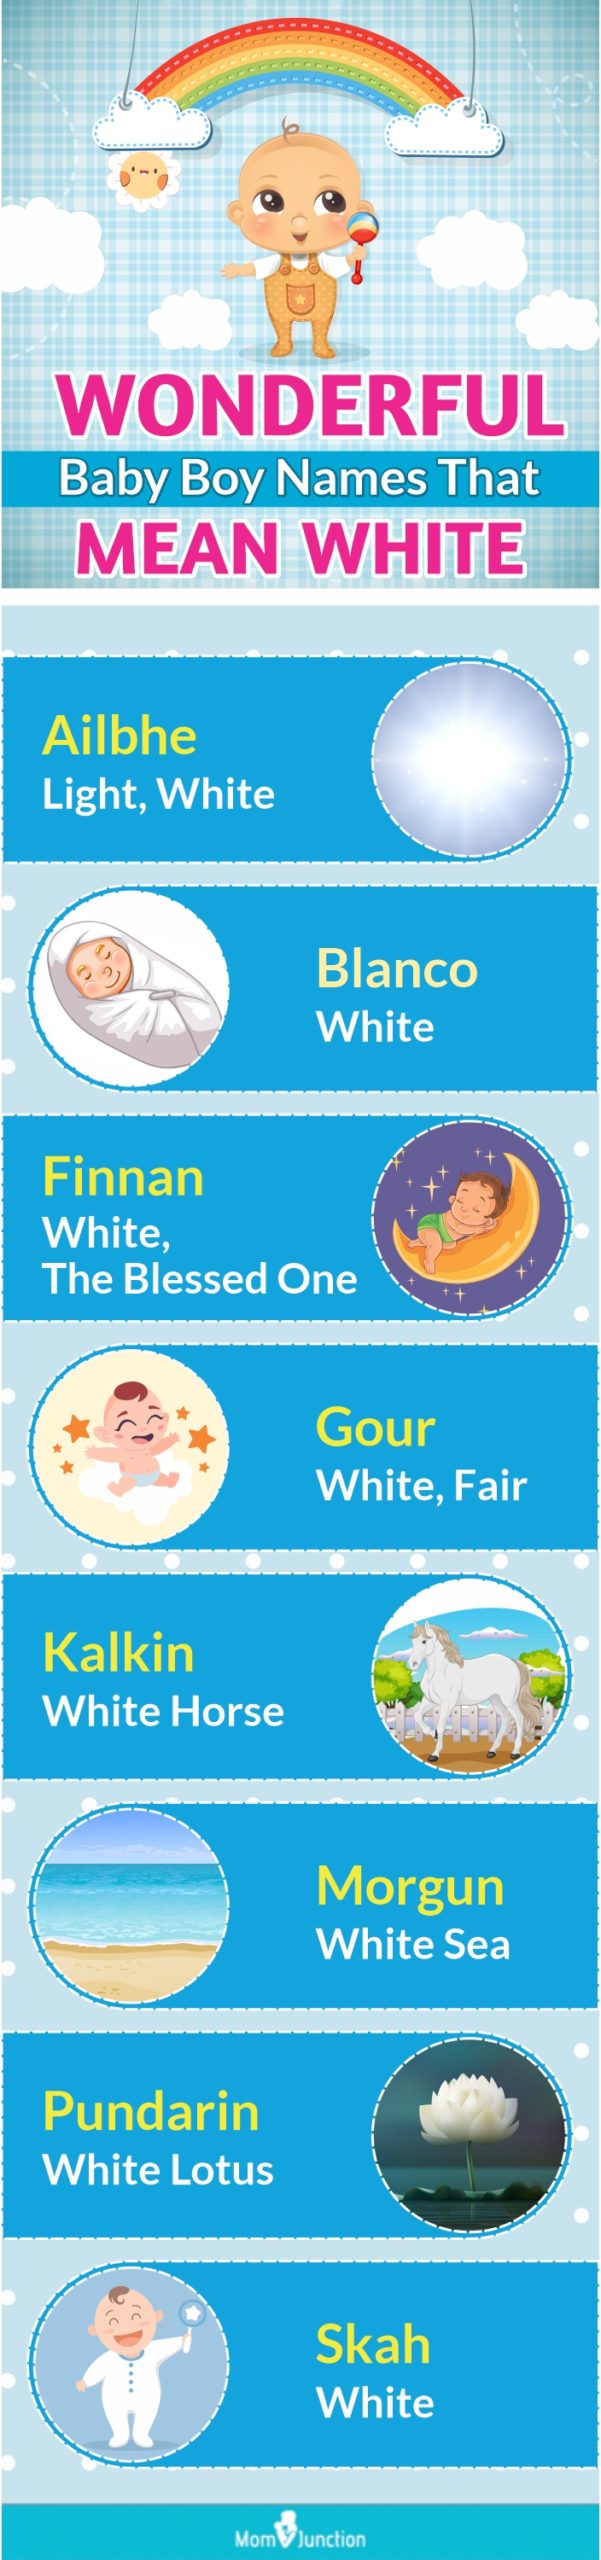 wonderful baby boy names that mean white (infographic)